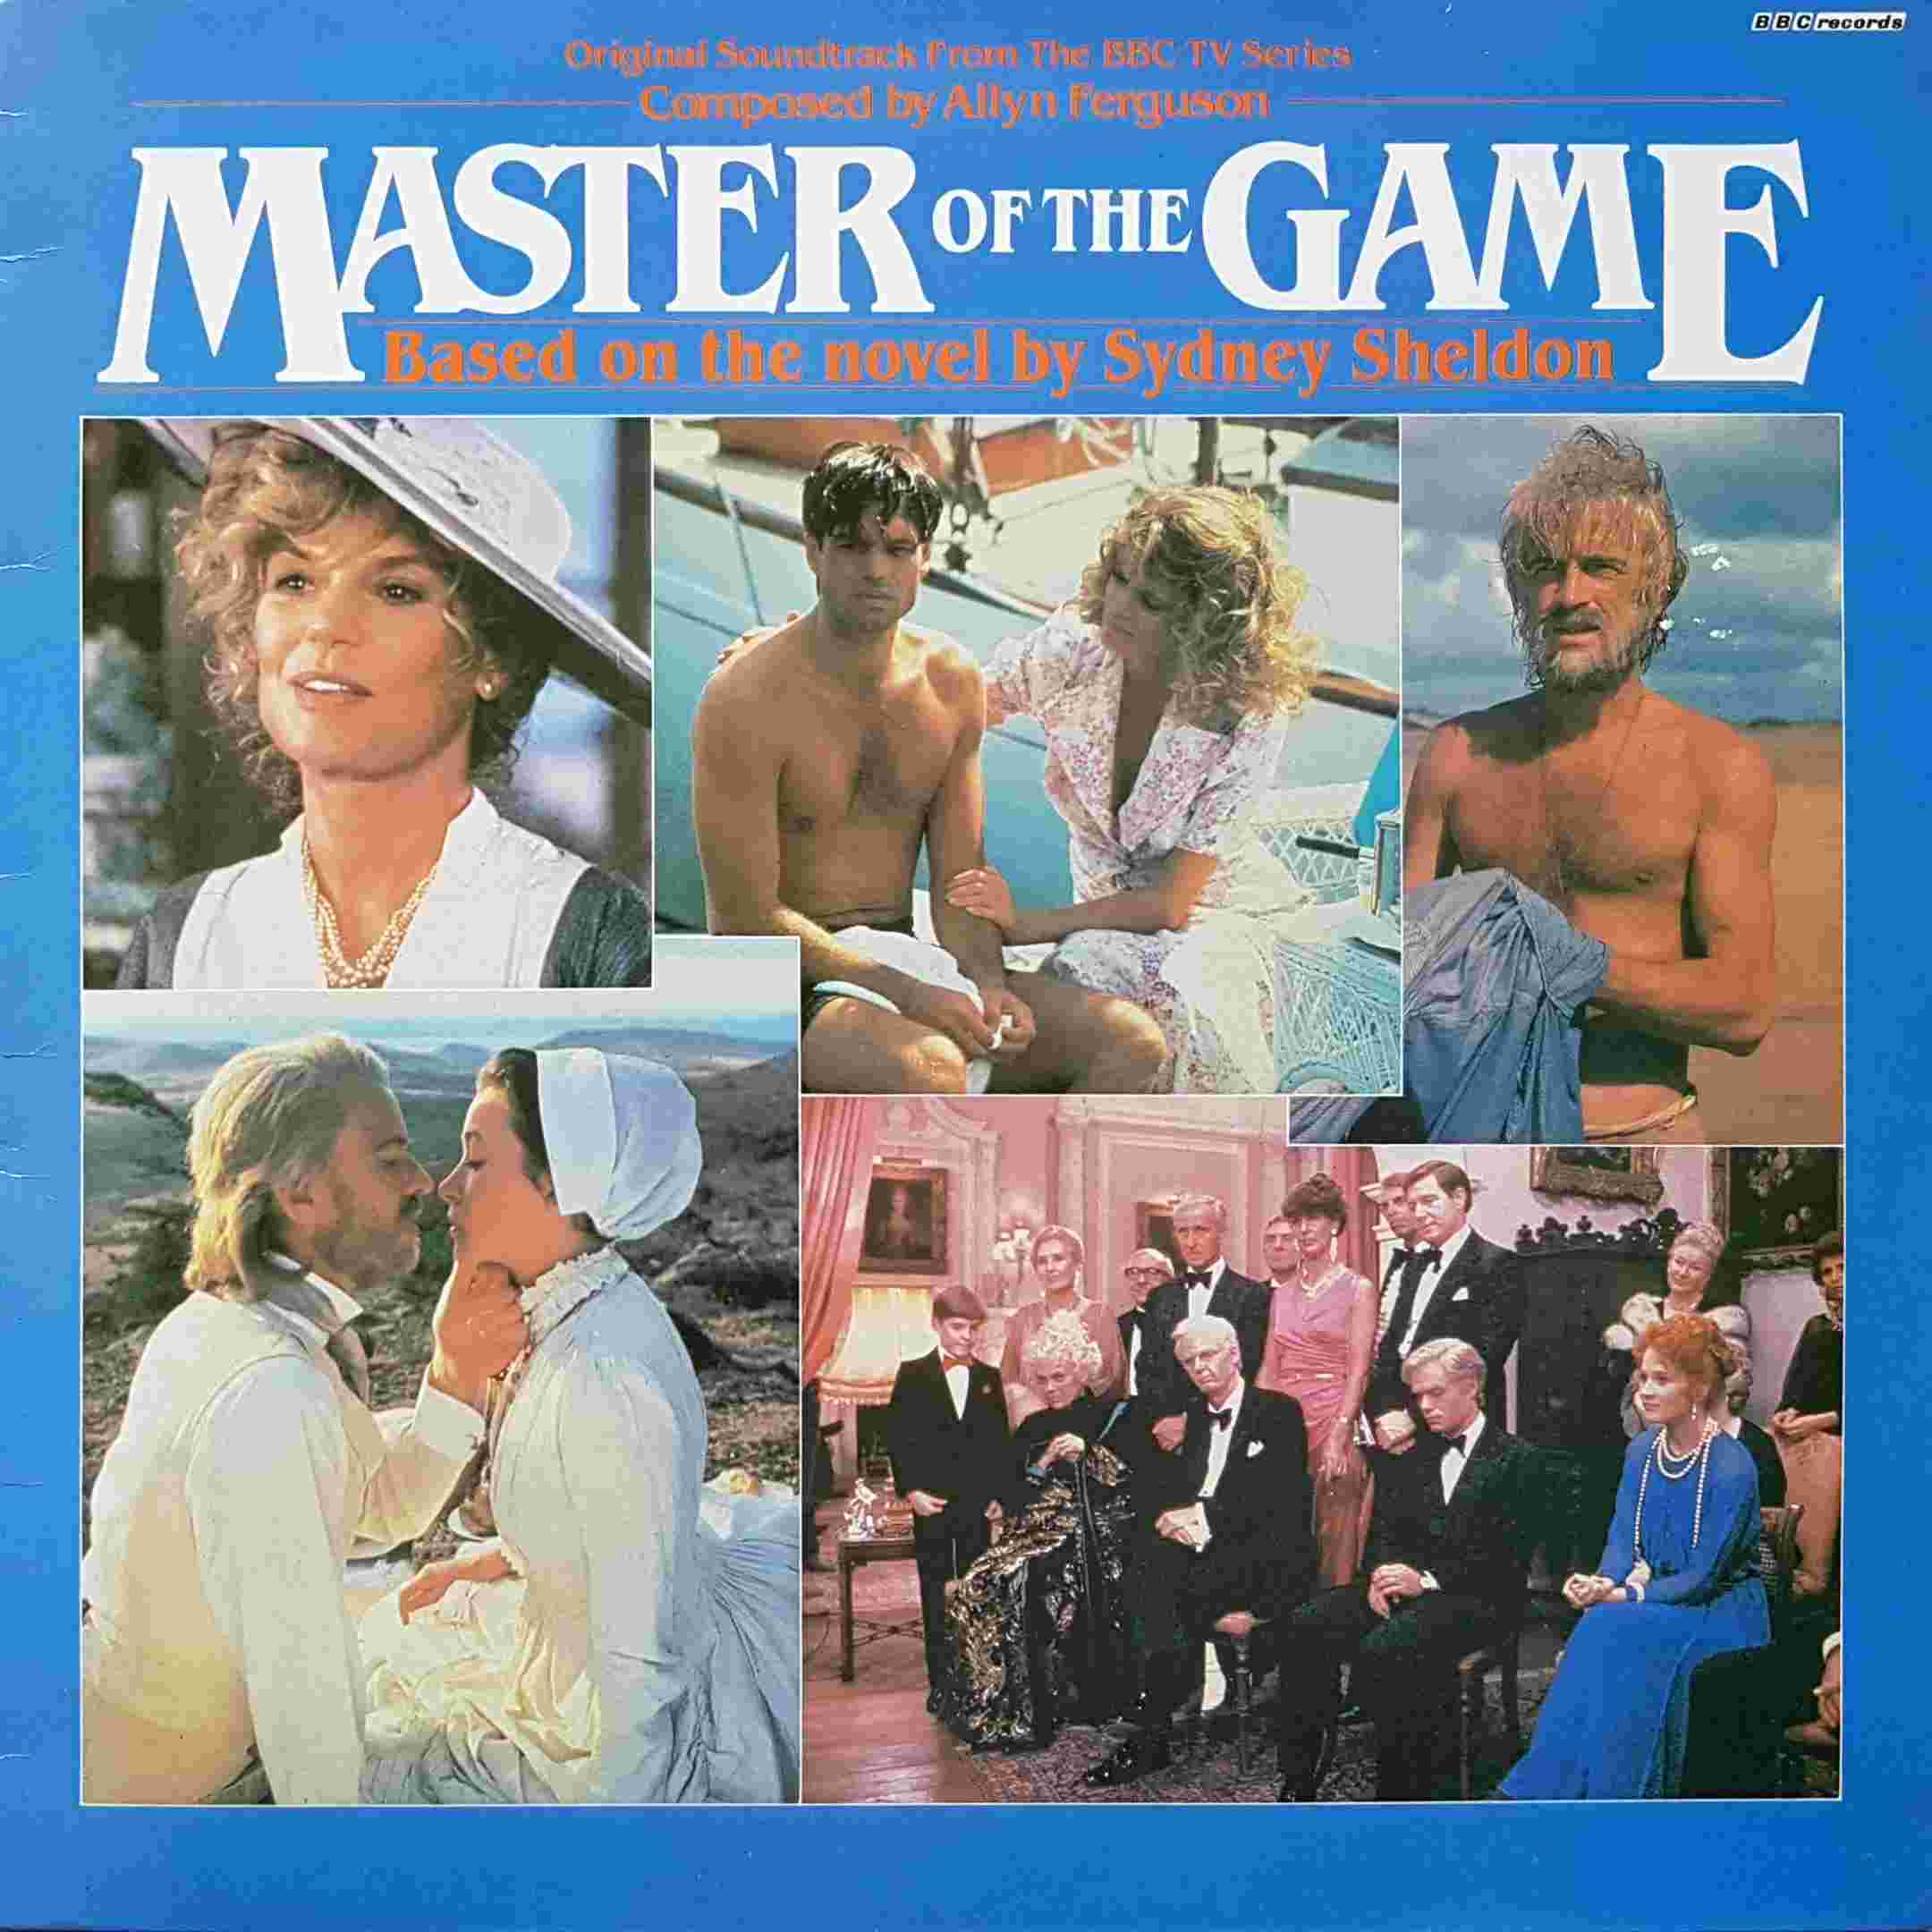 Picture of REB 521 Master of the game by artist Allyn Ferguson from the BBC albums - Records and Tapes library